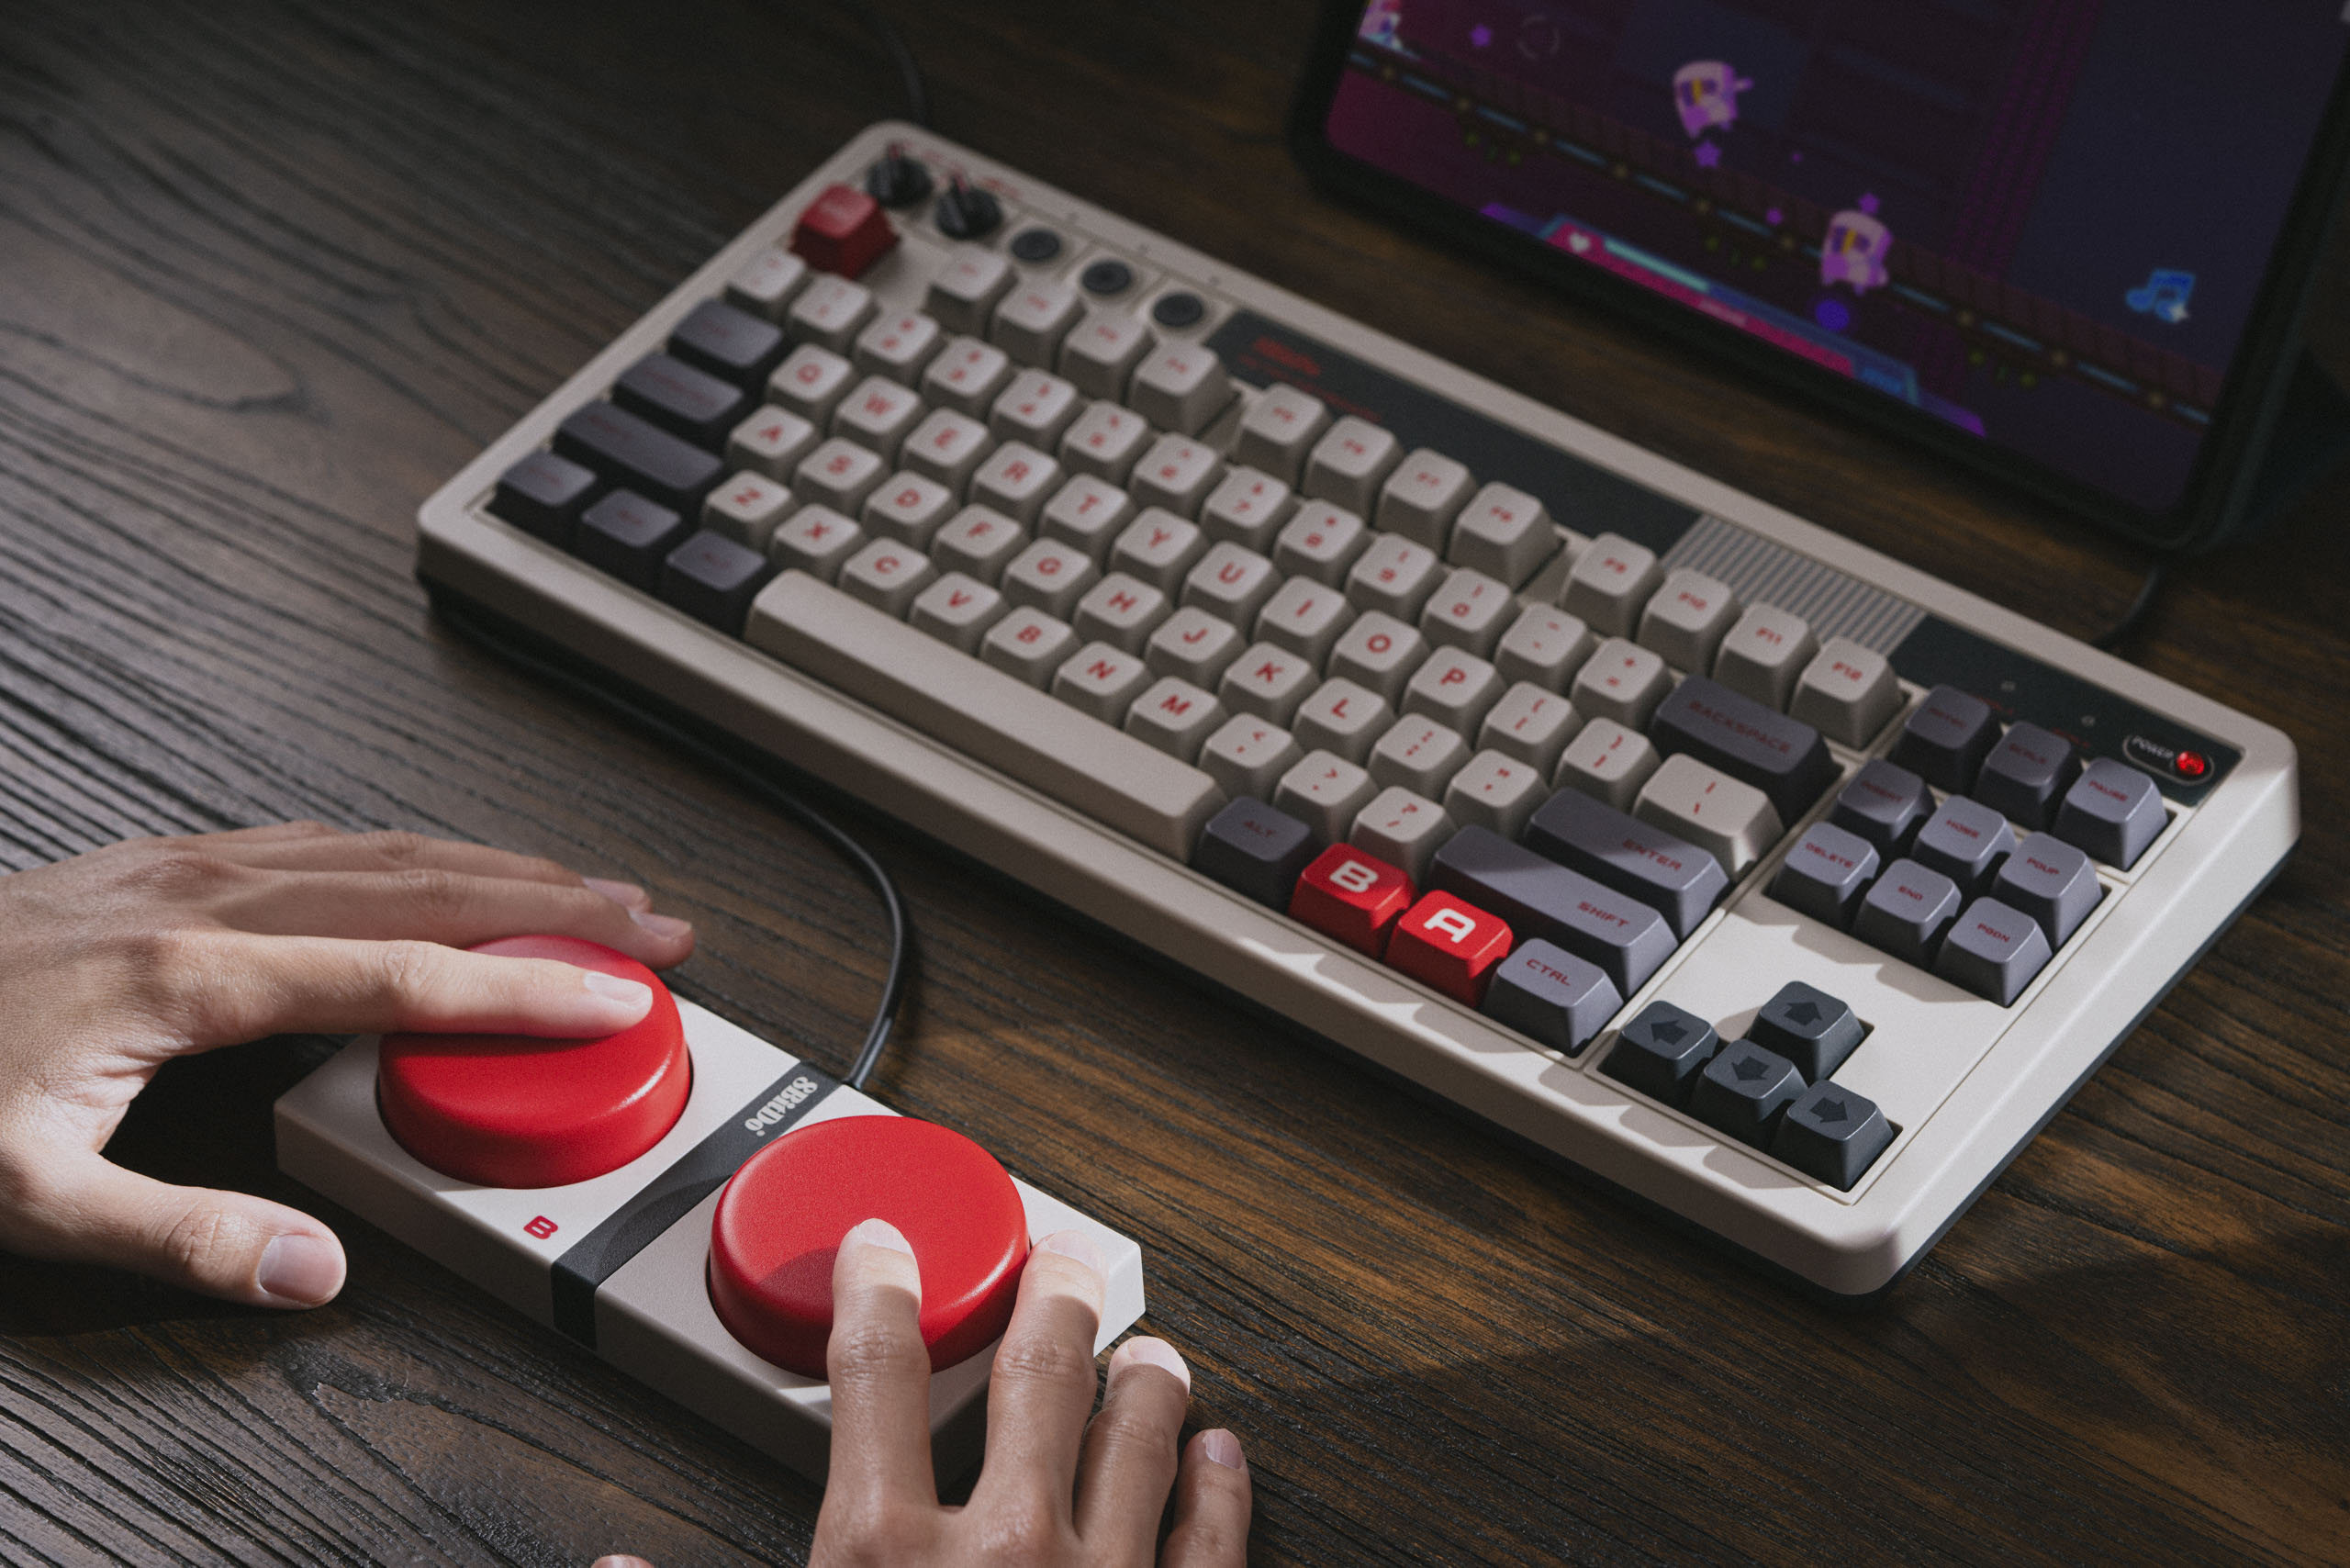 Marketing photography. A NES-colored mechanical keyboard sits on a dark wooden desk. Two hands mash two giant red buttons (also NES-styled) below.